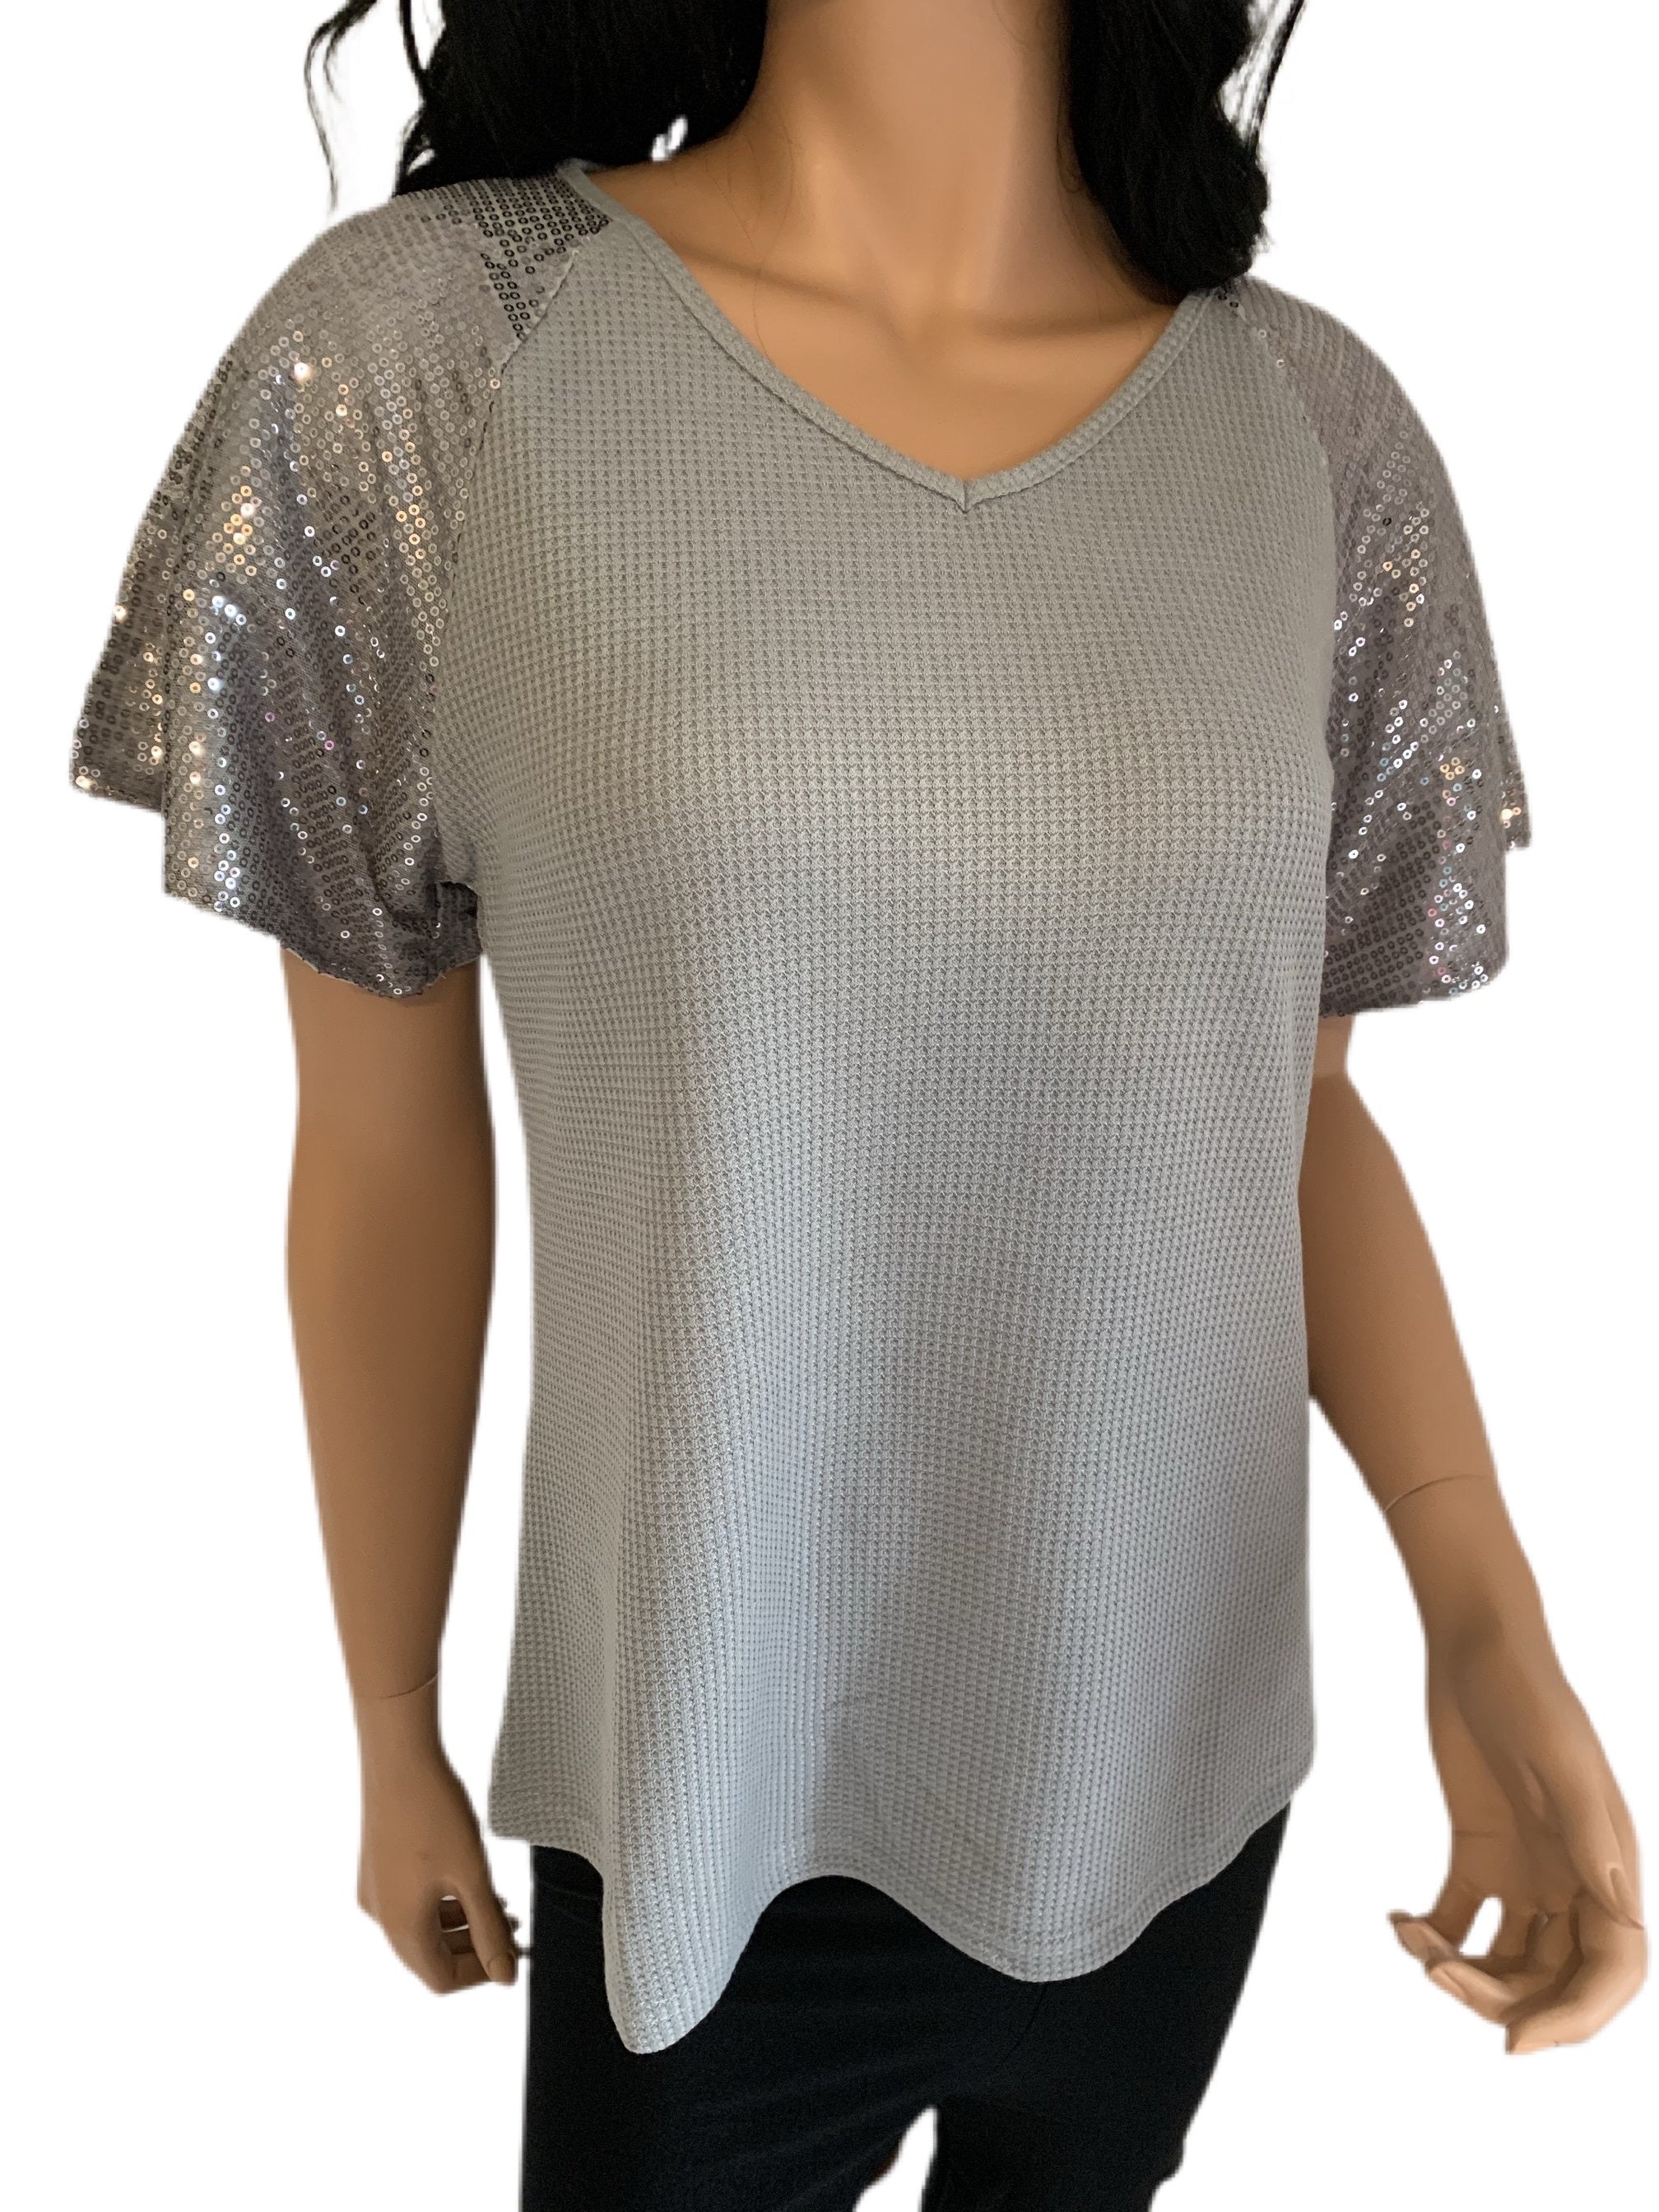 Gray Waffle Knit Sequined Short Sleeve Top